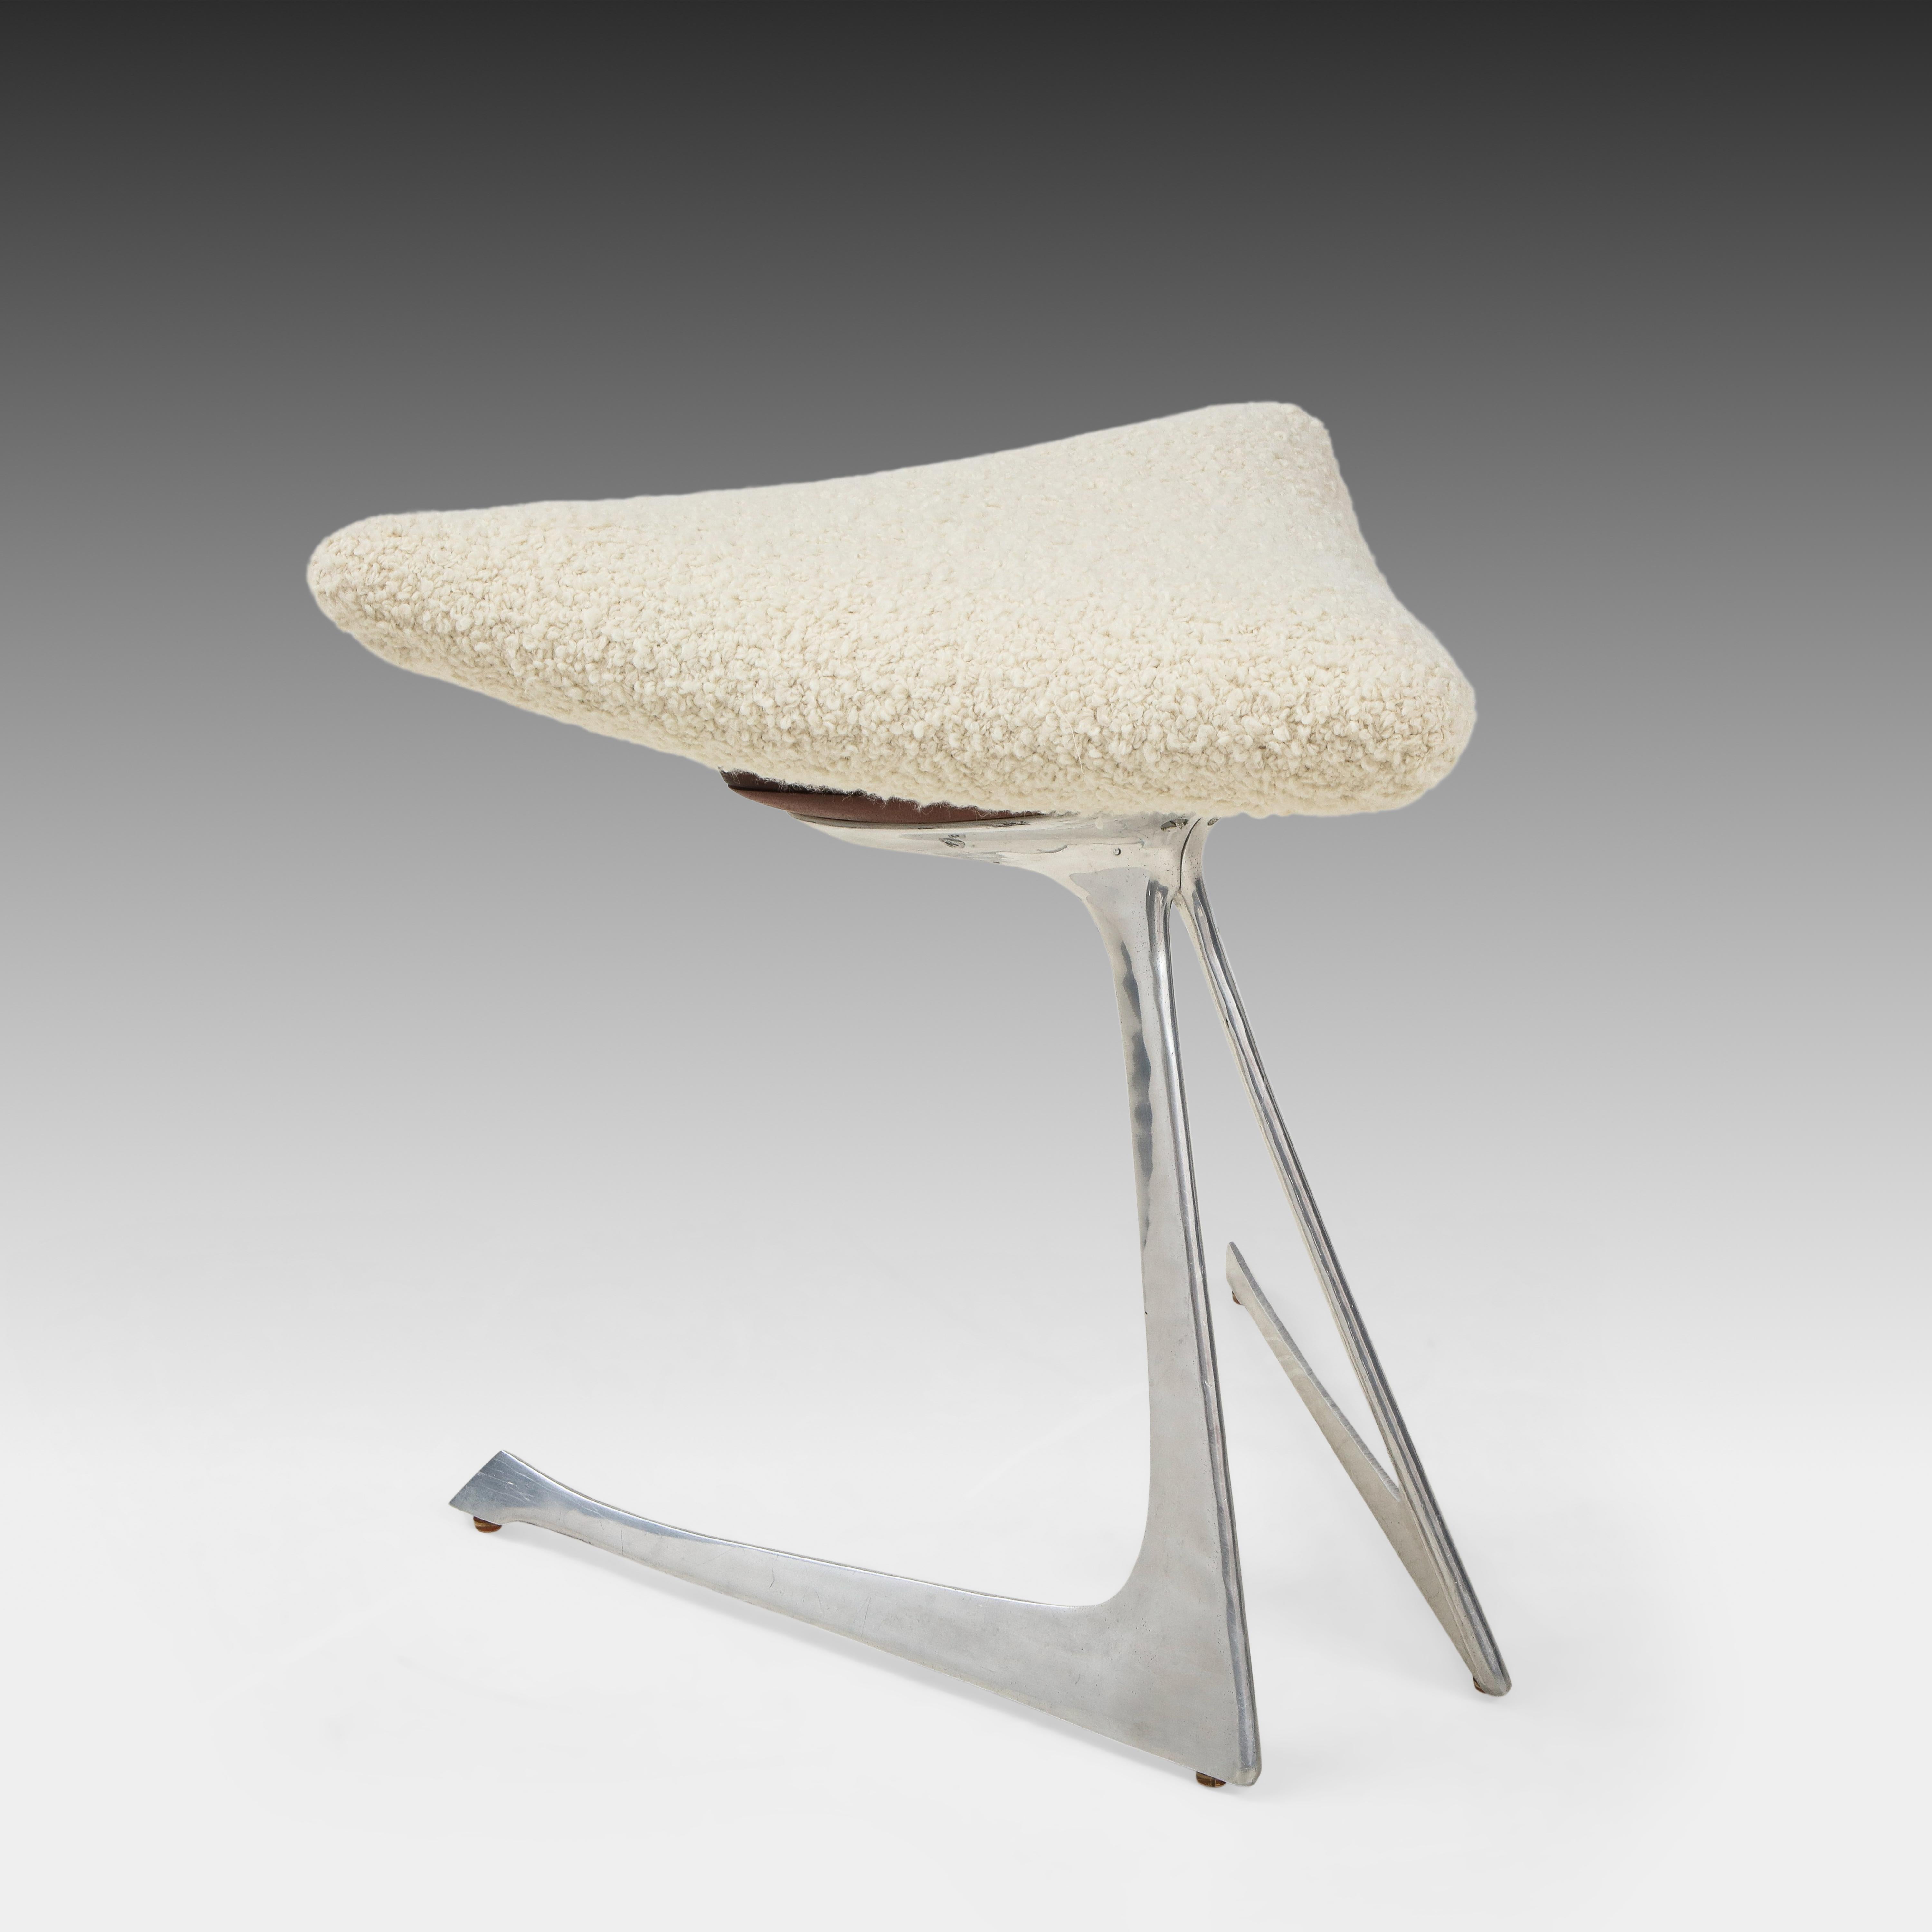 Vladimir Kagan for Vladimir Kagan Designs, Inc. very rare Unicorn triangular stool with ivory bouclé upholstered cushion on cast and polished aluminum base. Newly reupholstered in a luxurious Rosemary Hallgarten ivory or white alpaca wool